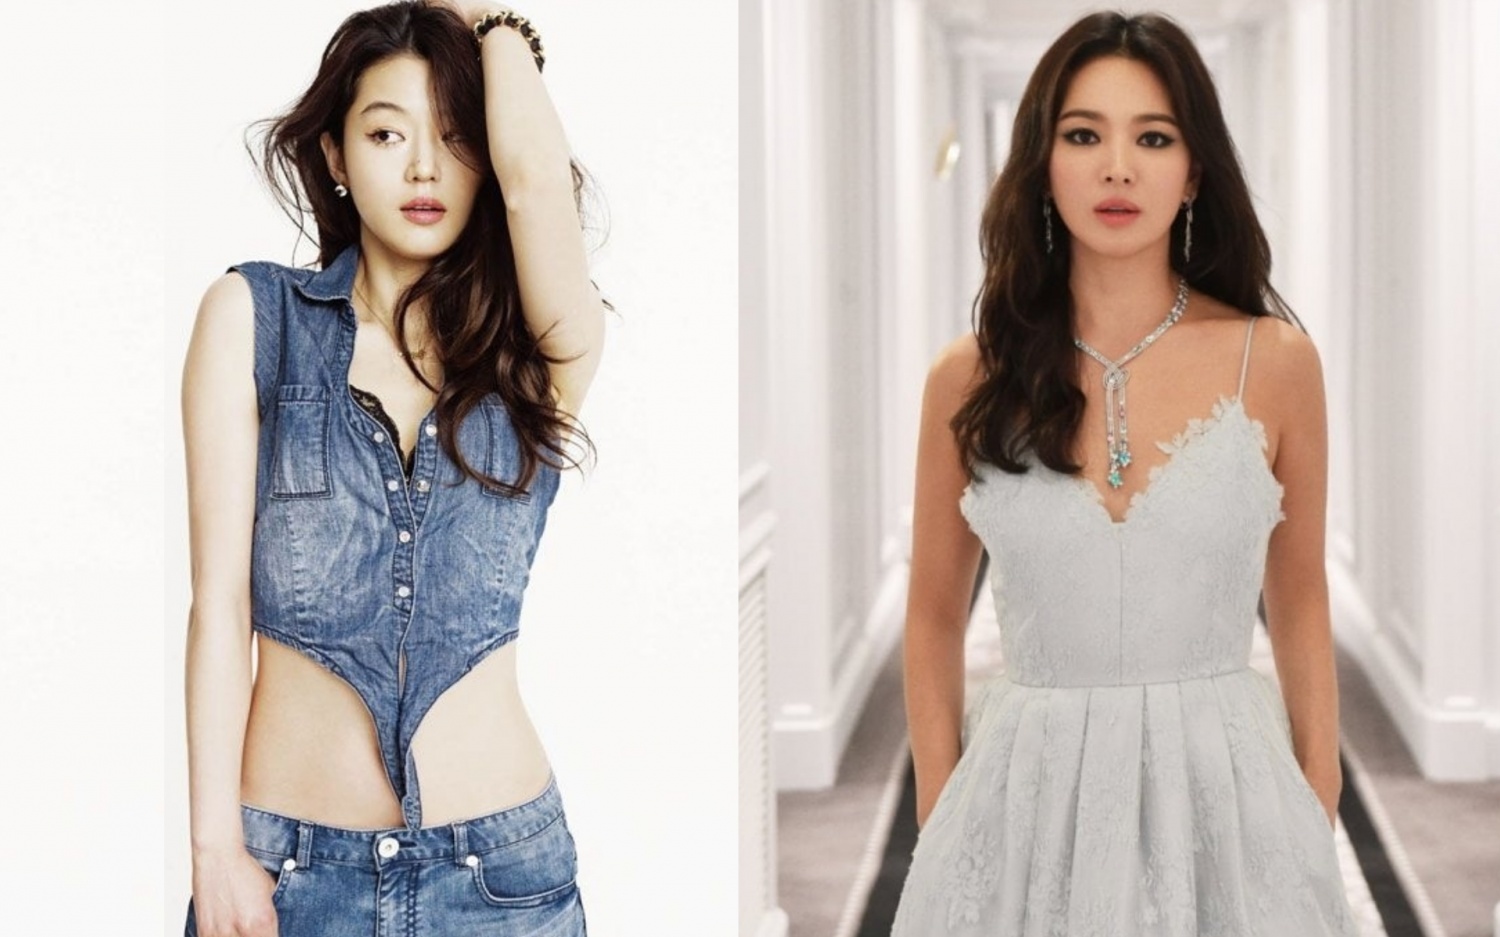 Hot Korean Actresses List, with Photos (Page 4)